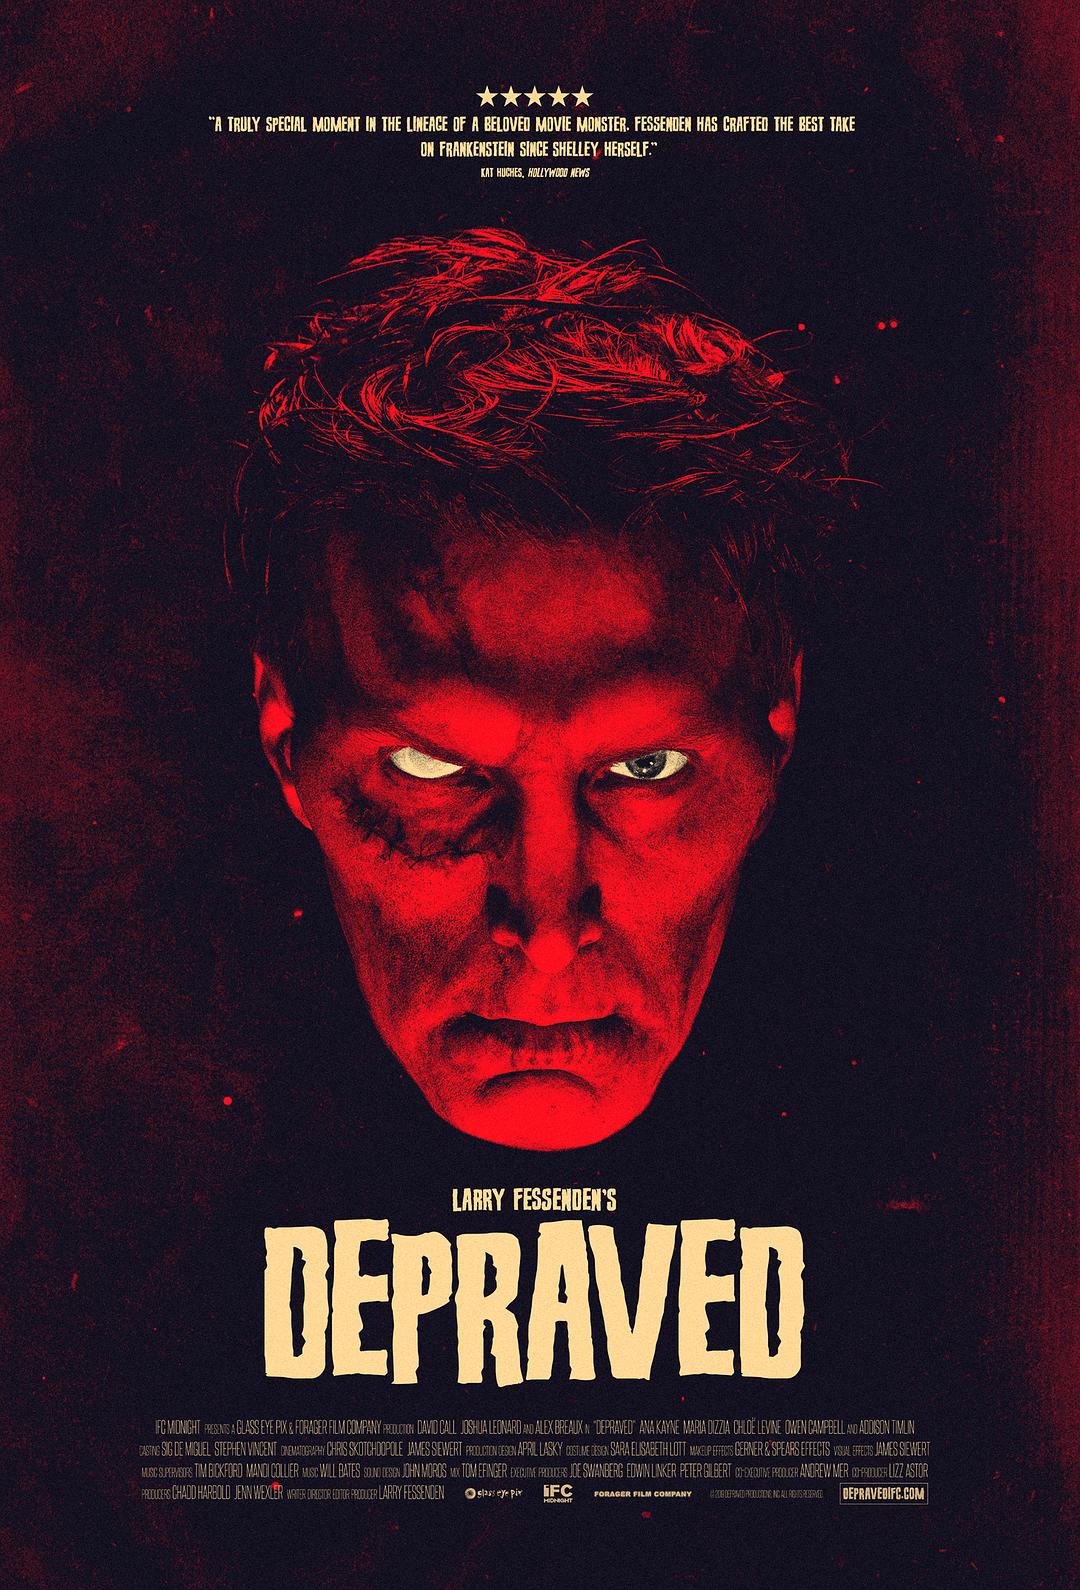  Depraved.2019.1080p.BluRay.AVC.DTS-HD.MA.5.1-FGT 43.61GB-1.png